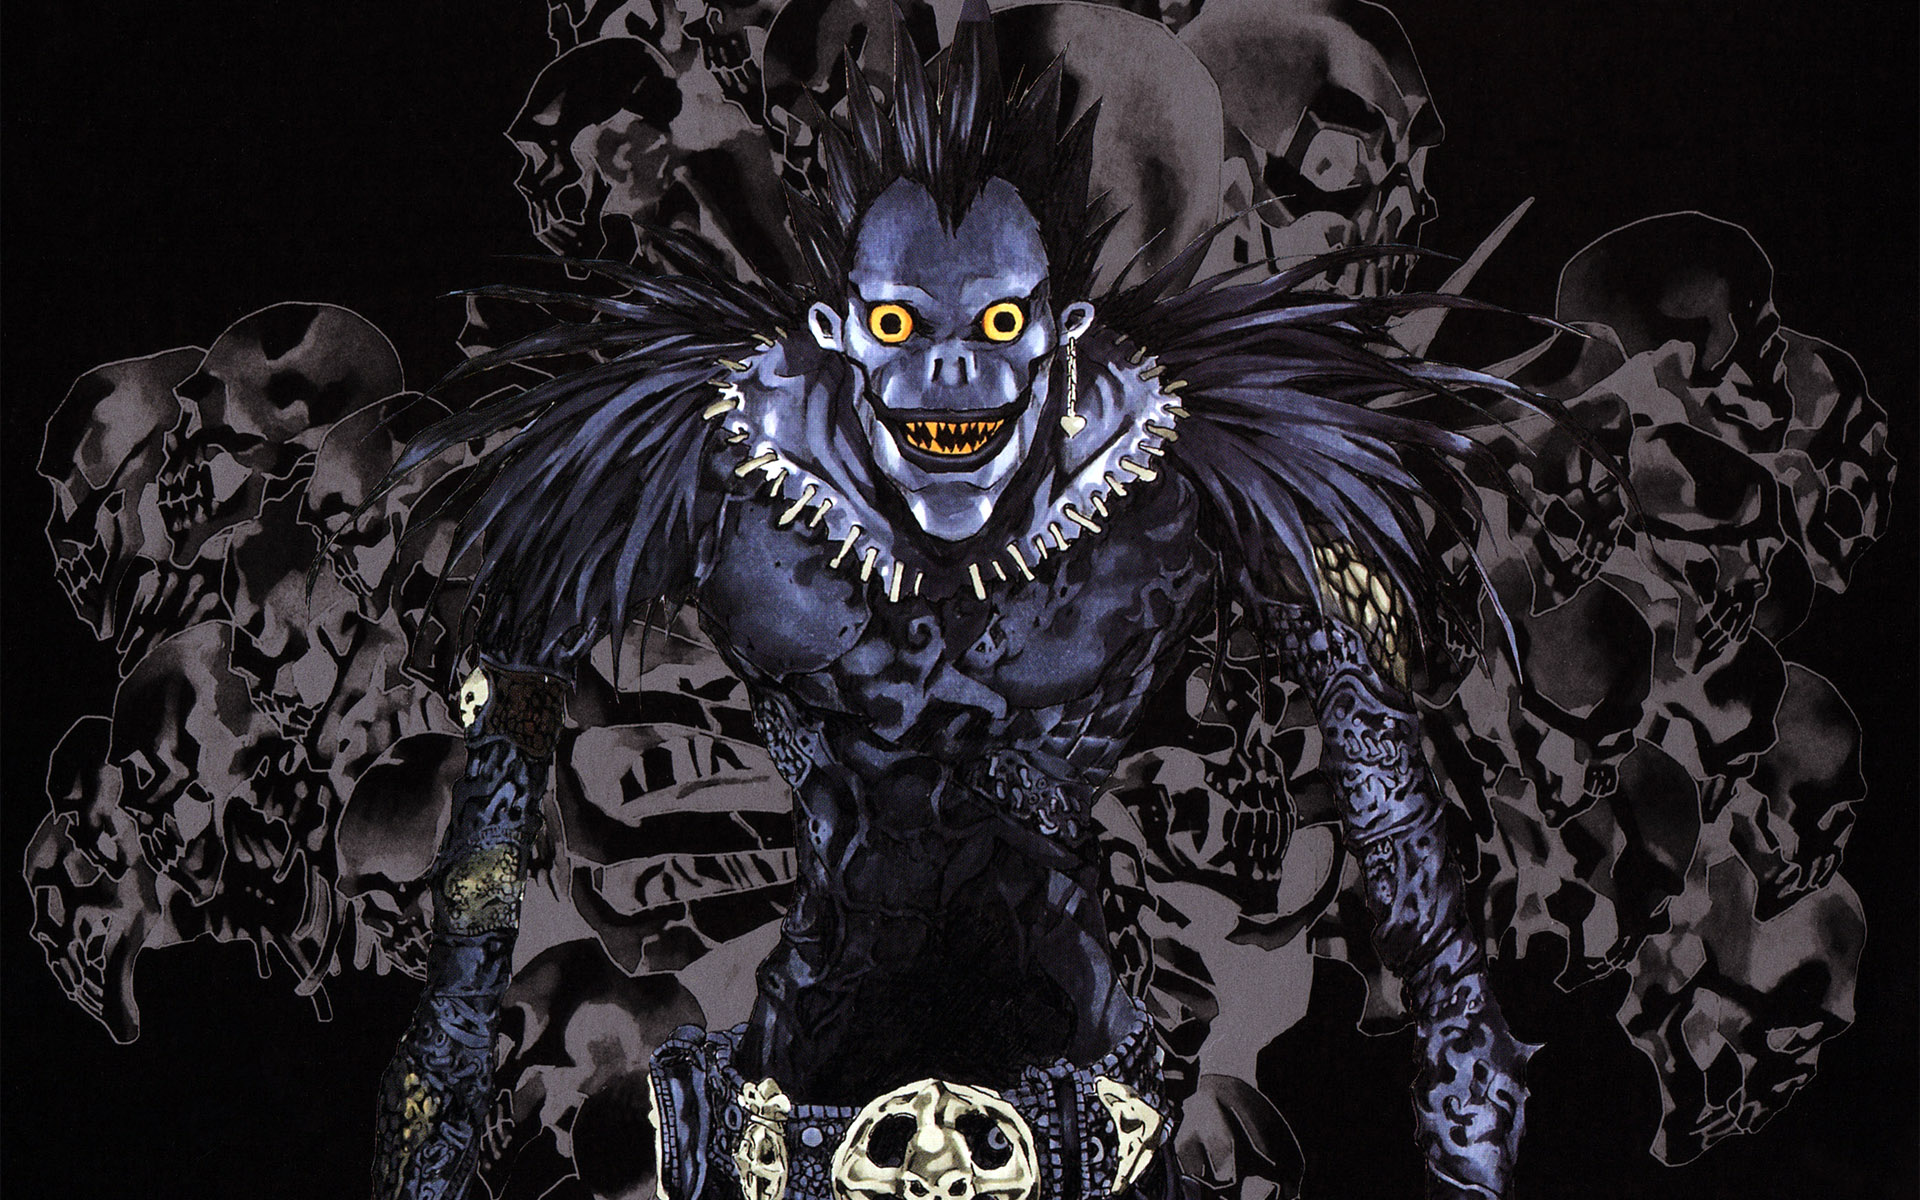 Death Note Cover Wallpaper Android High Resolution